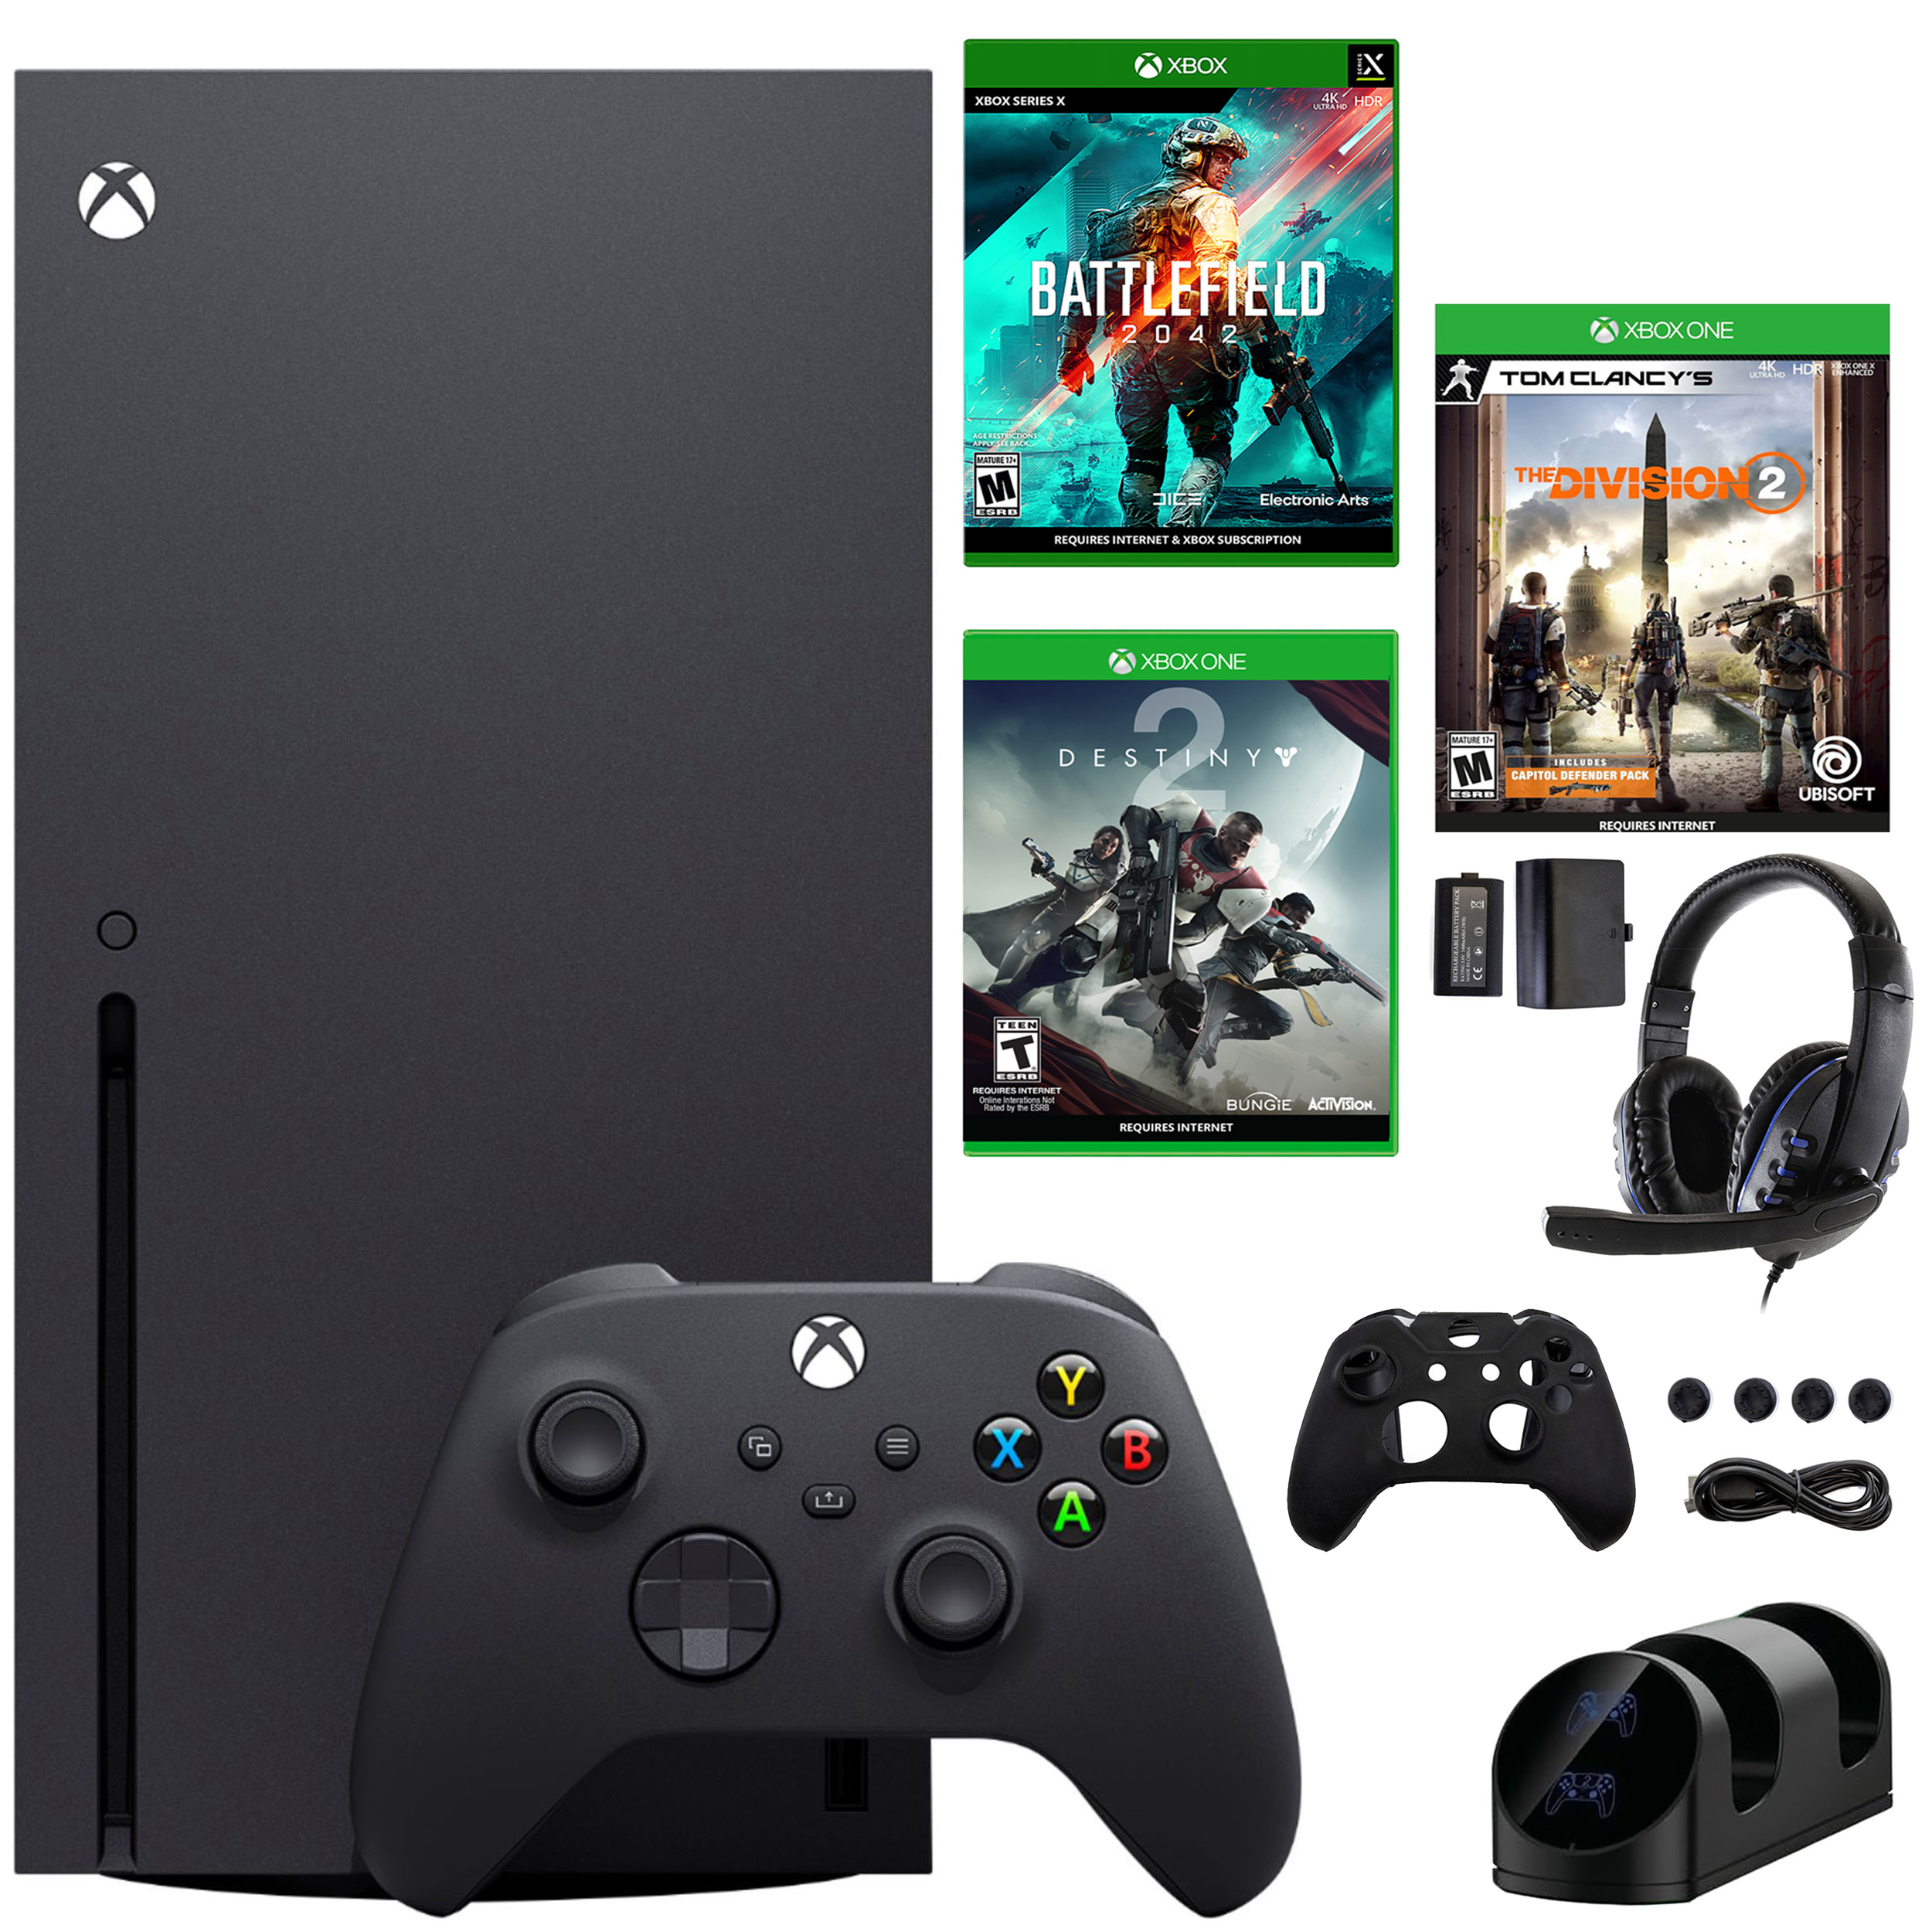 Microsoft Xbox Series X 1TB Console with Games and Accessories Kit